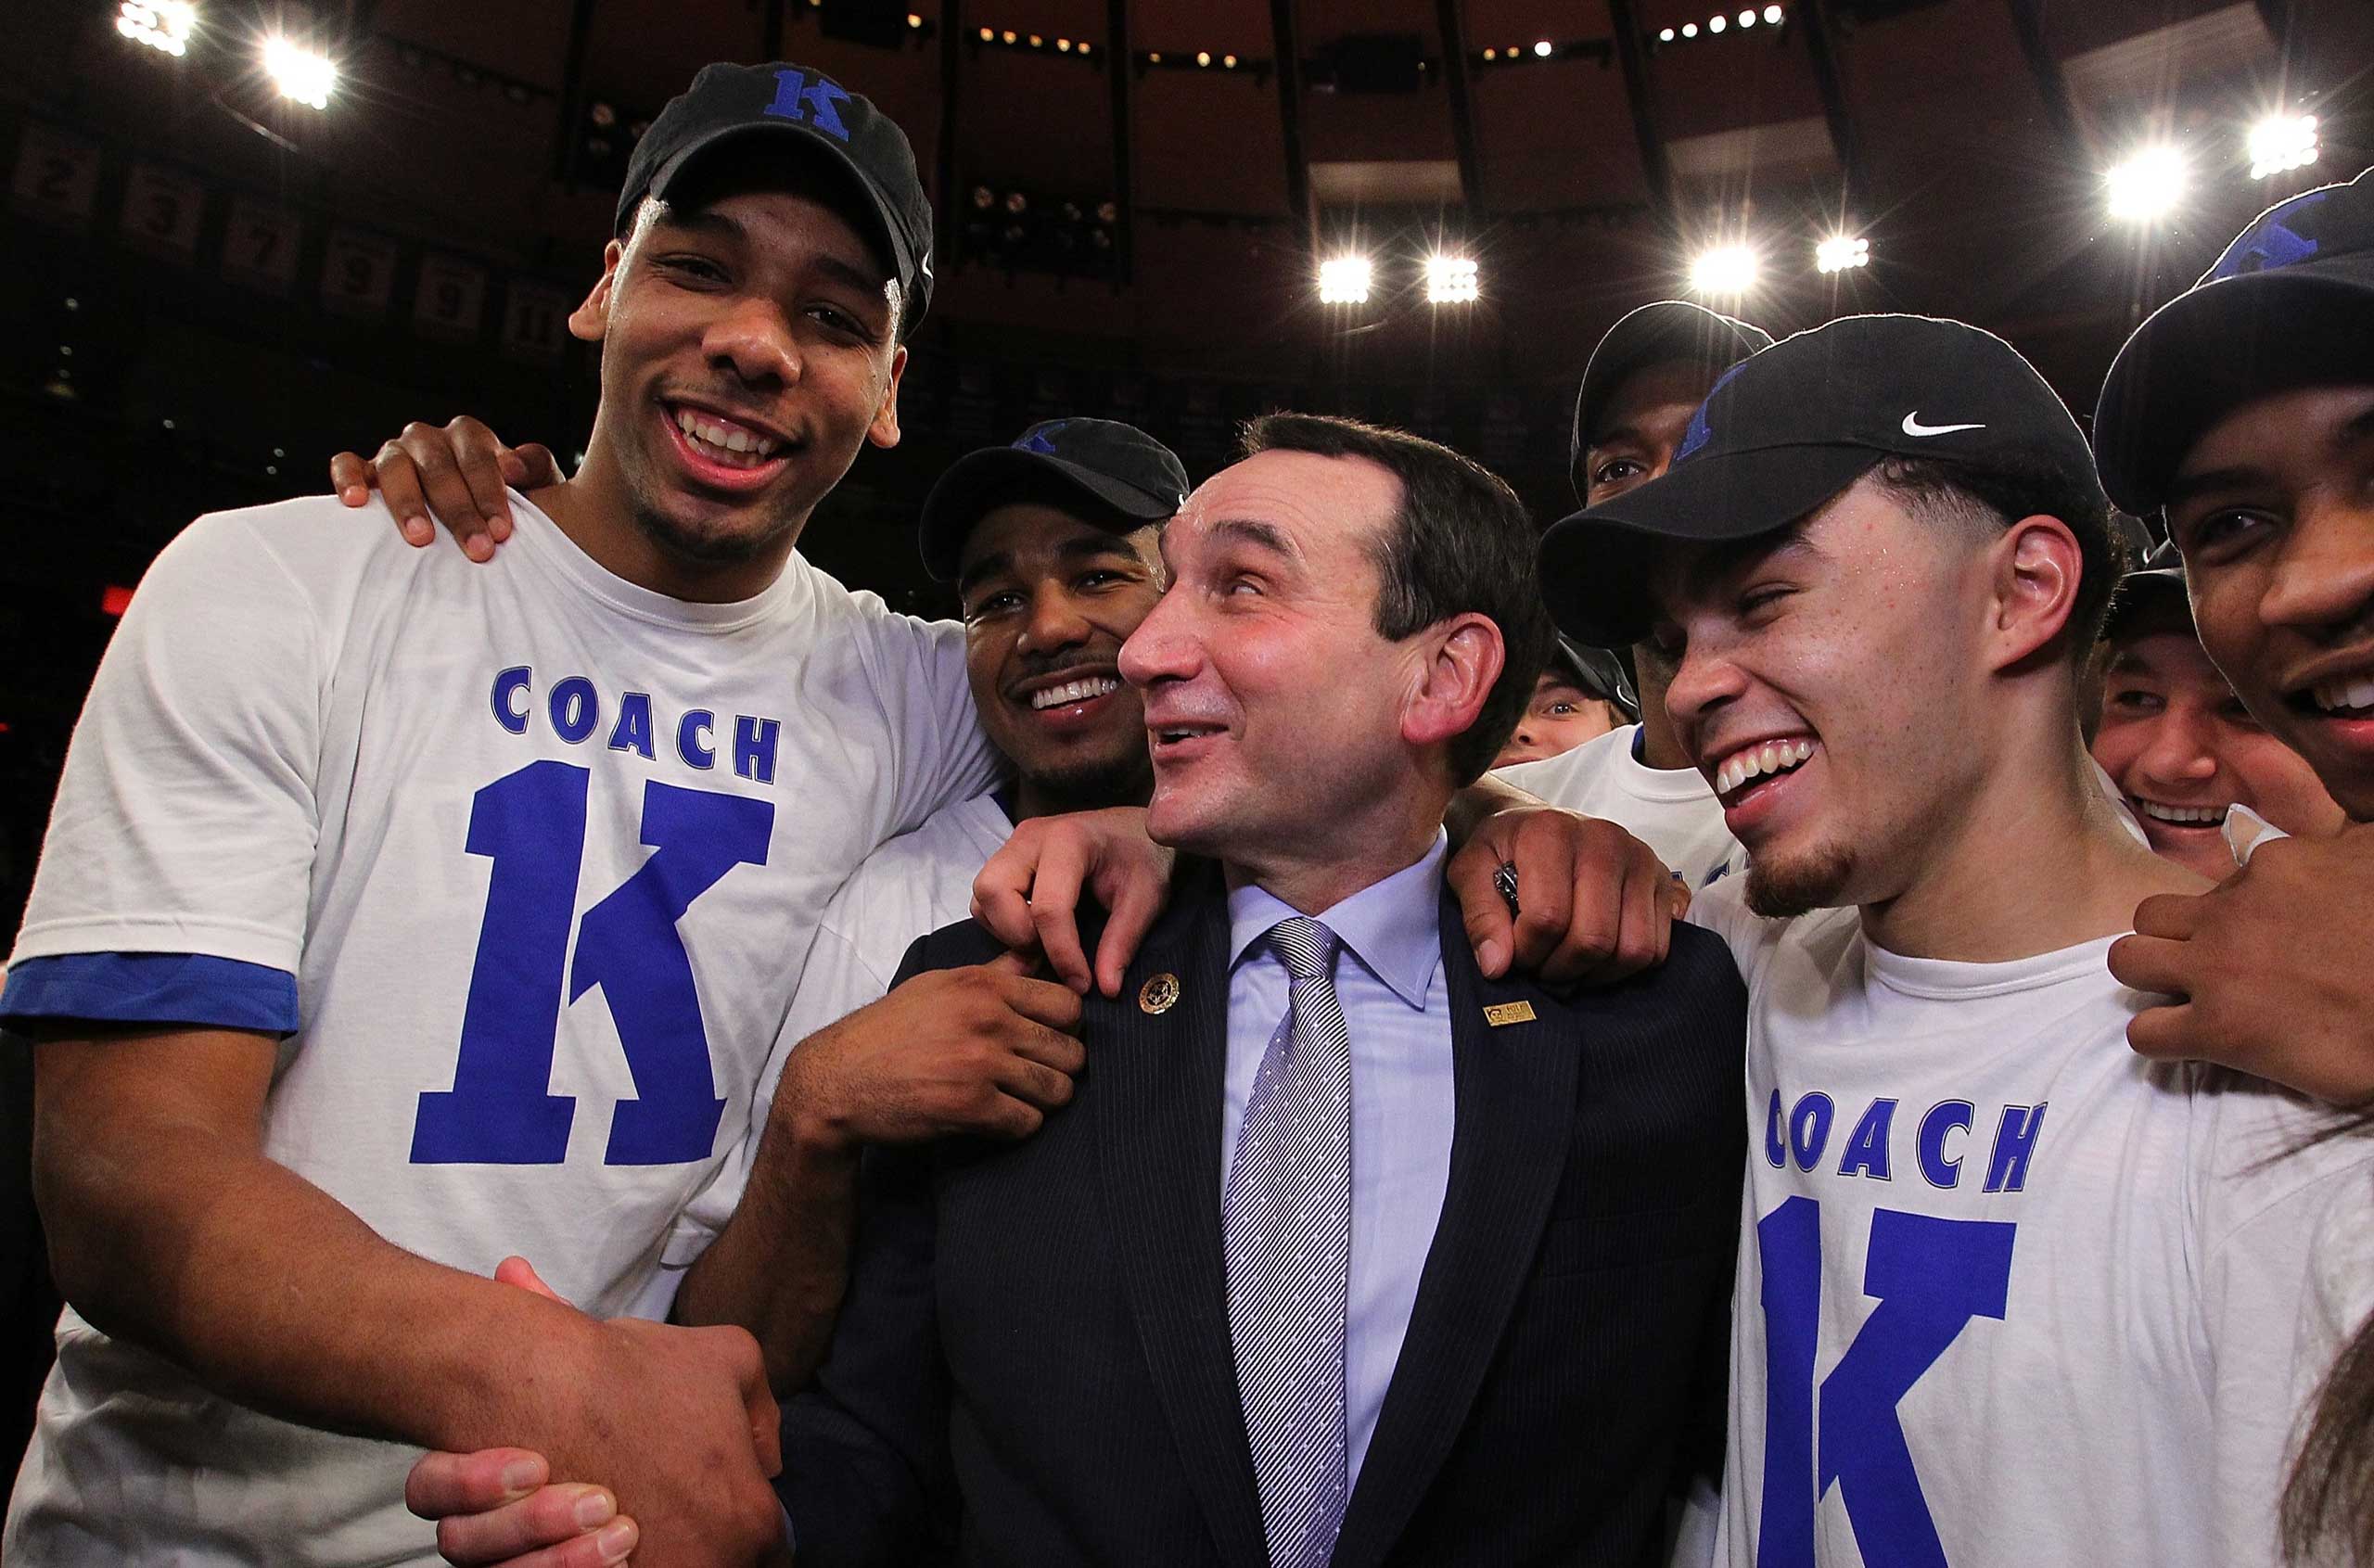 Head coach Mike Krzyzewski of the Duke Blue Devils celebrates with teamates after his 1000th career win after the game against the St. John's Red Storm at Madison Square Garden on January 25, 2015 in New York City. (Nate Shron&mdash;Getty Images)